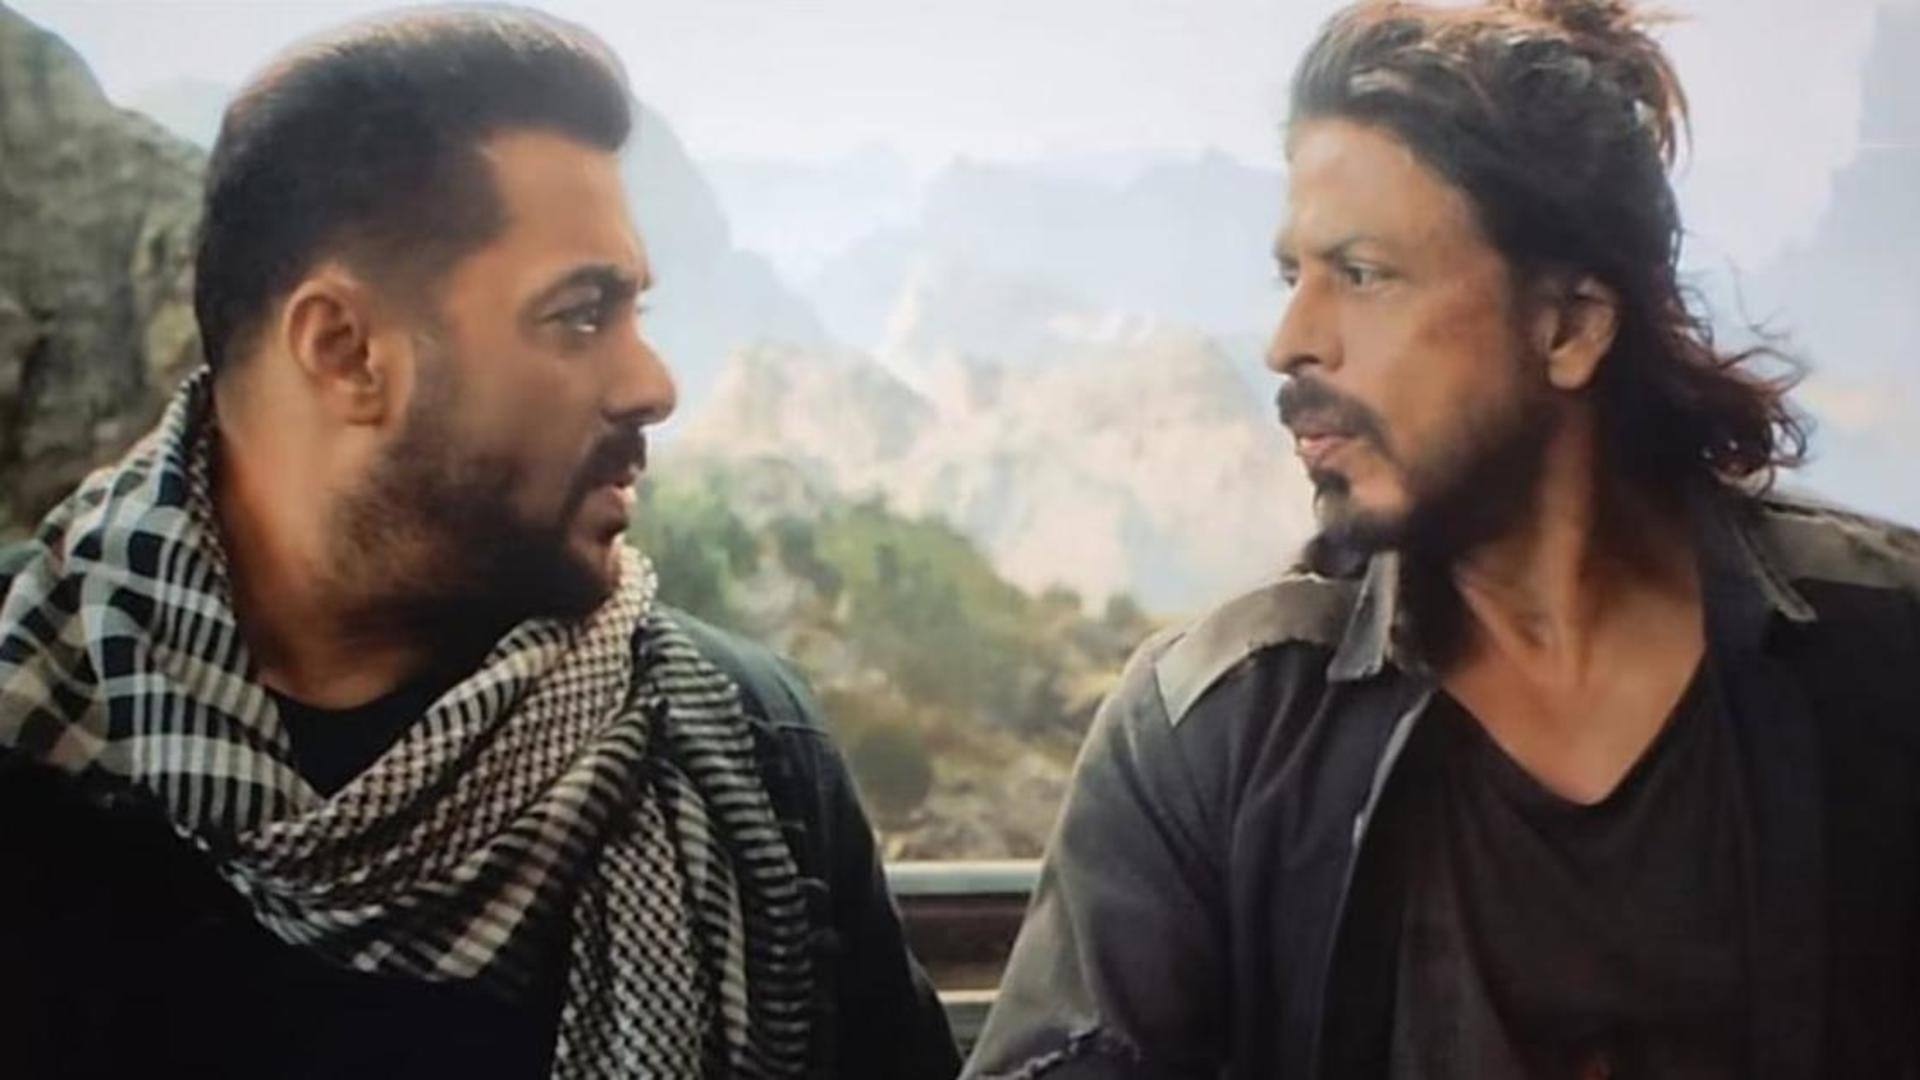 Film on Salman's Tiger against Shah Rukh's Pathaan might happen